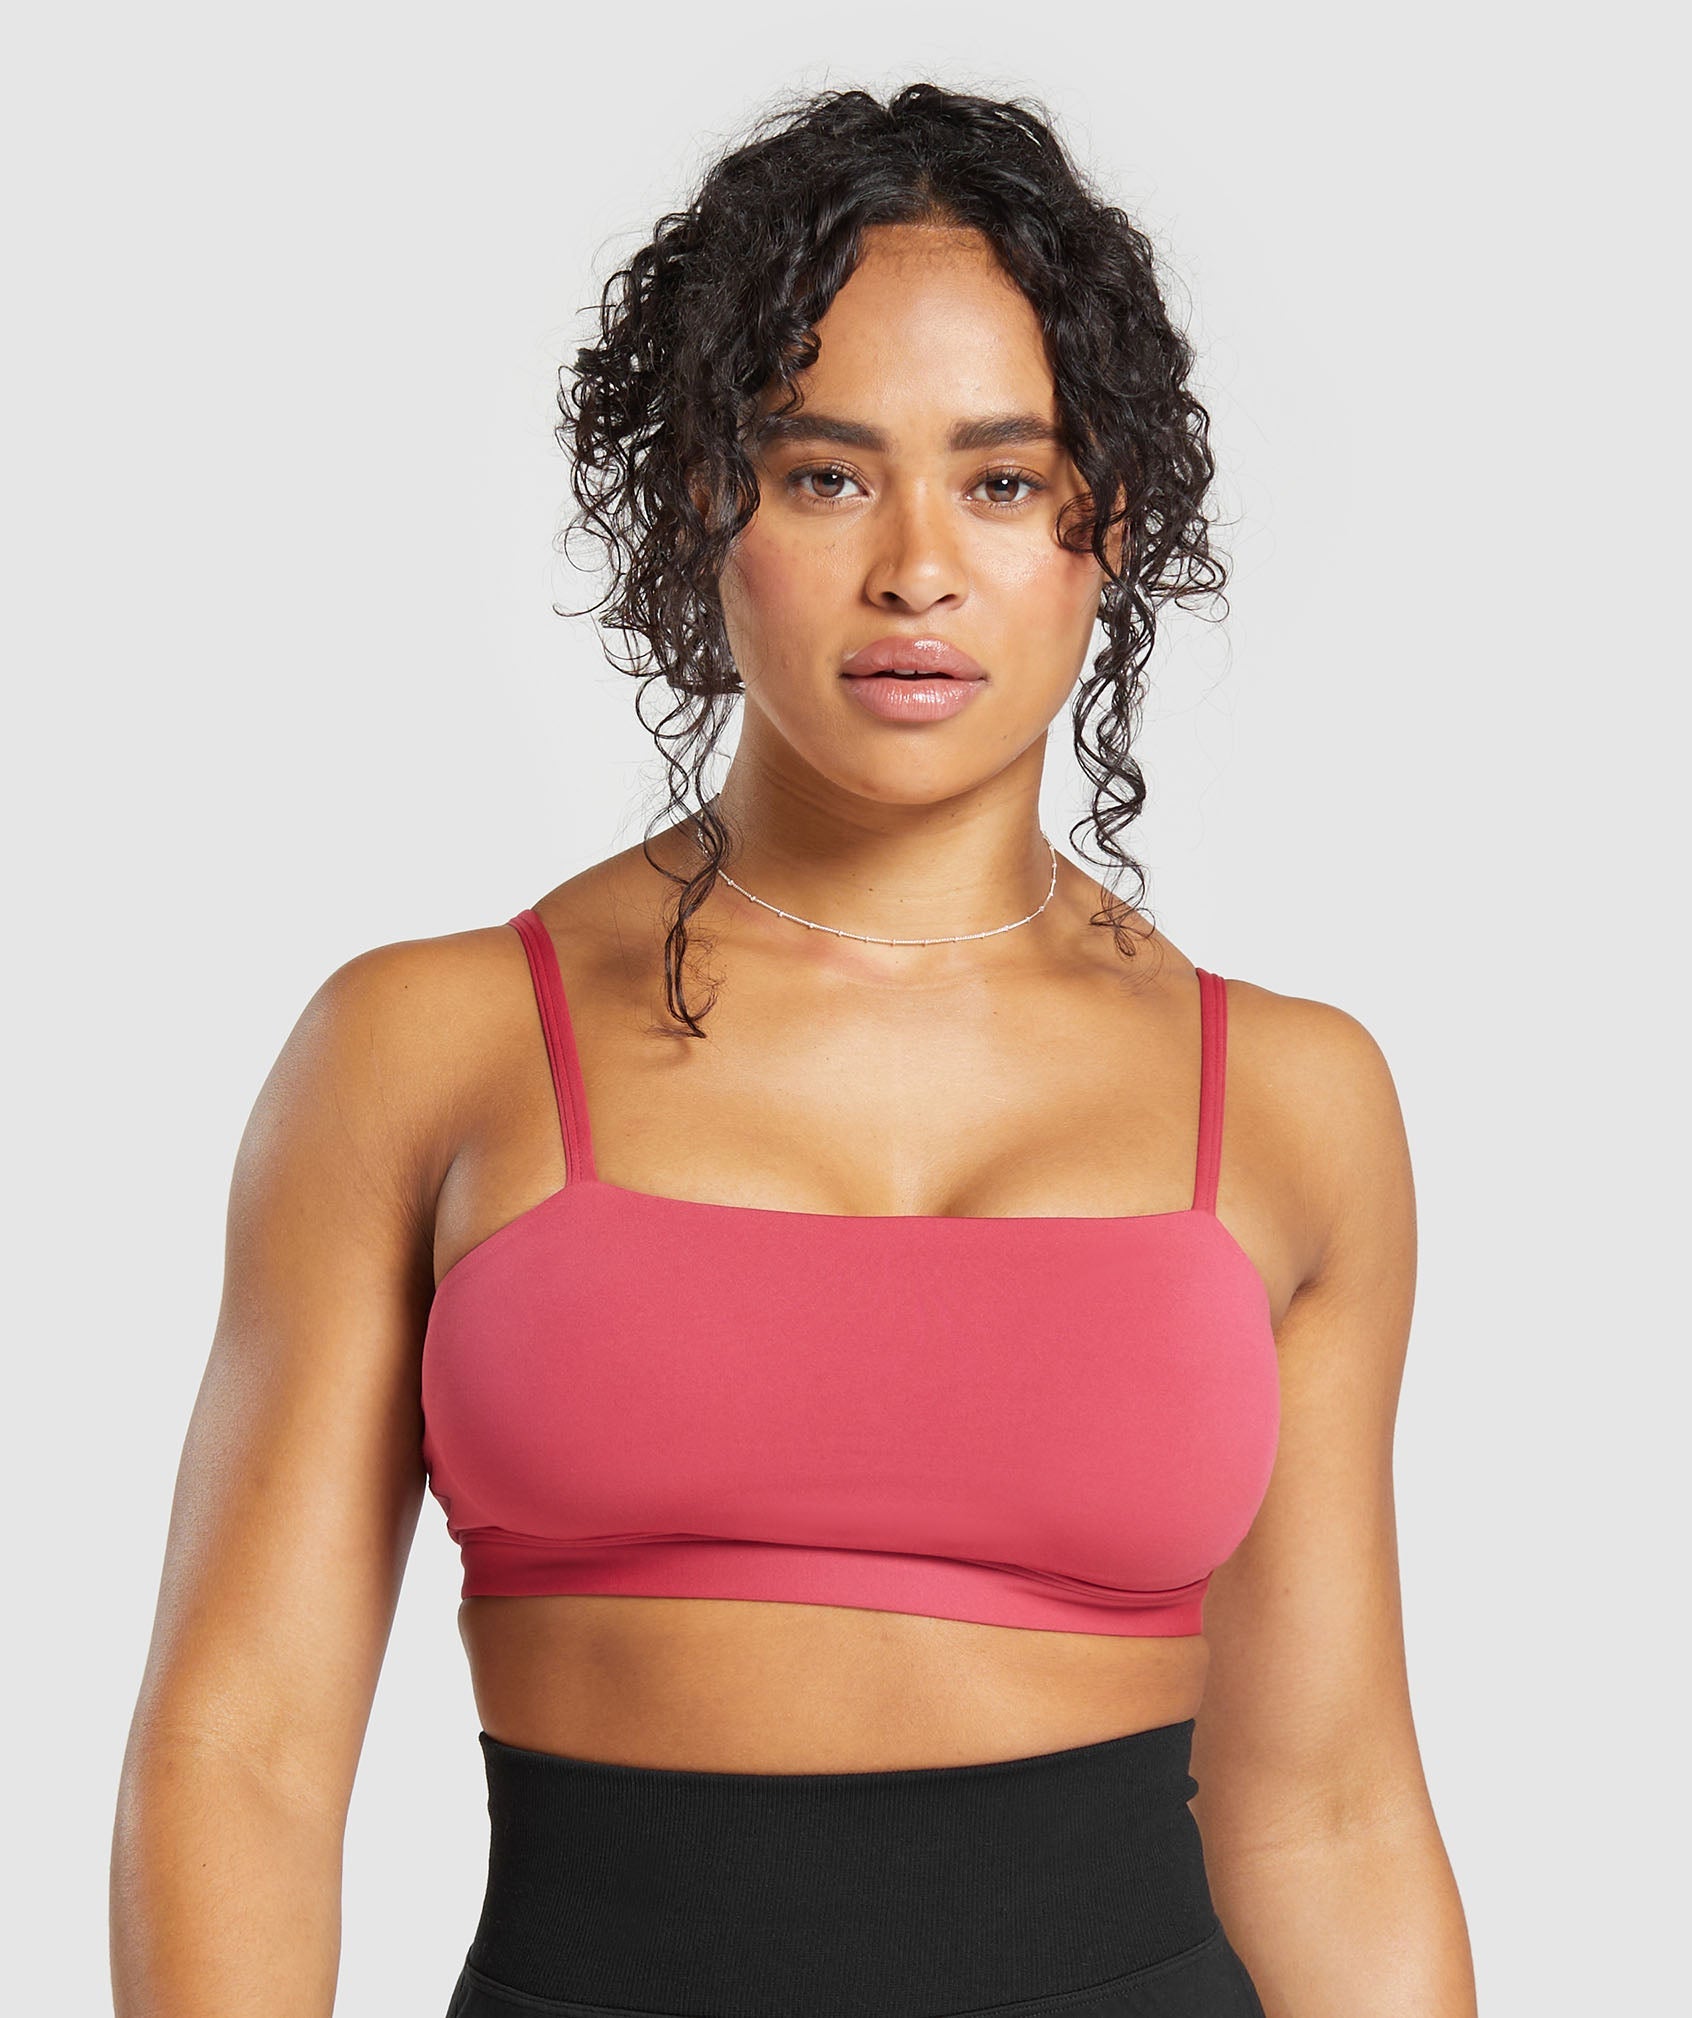 BNWOT Gymshark Pink Ruched Sports Bra - XL, Extra Large